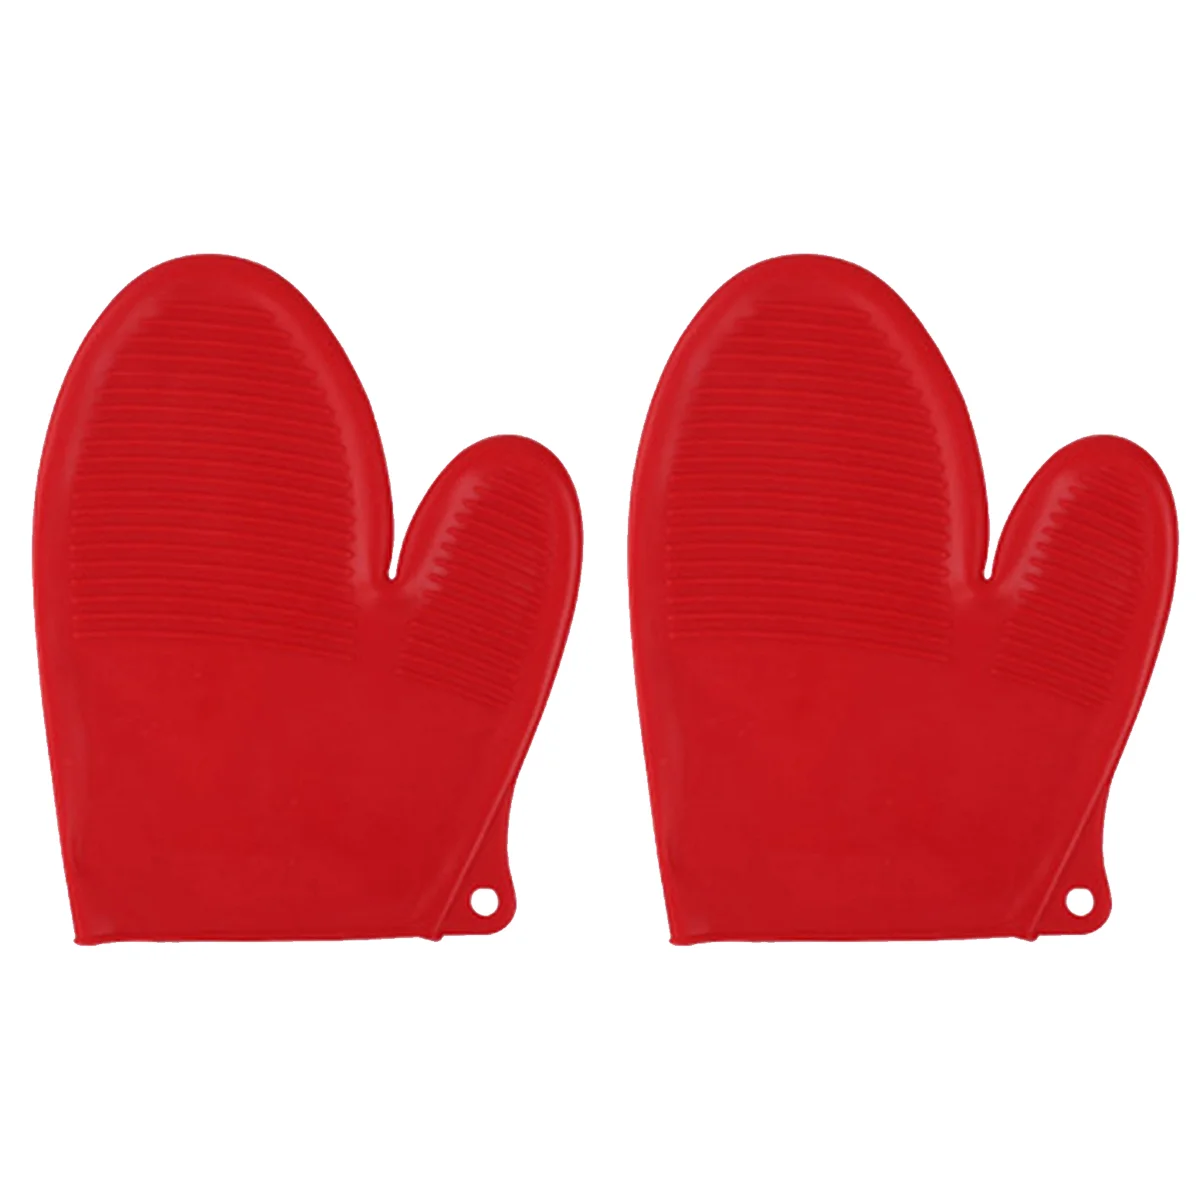 

2Pcs Silicone Mitts Heat Resistant Anti-Scald Anti-Skid Kitchen Use Oven Mitts(Candy Red)